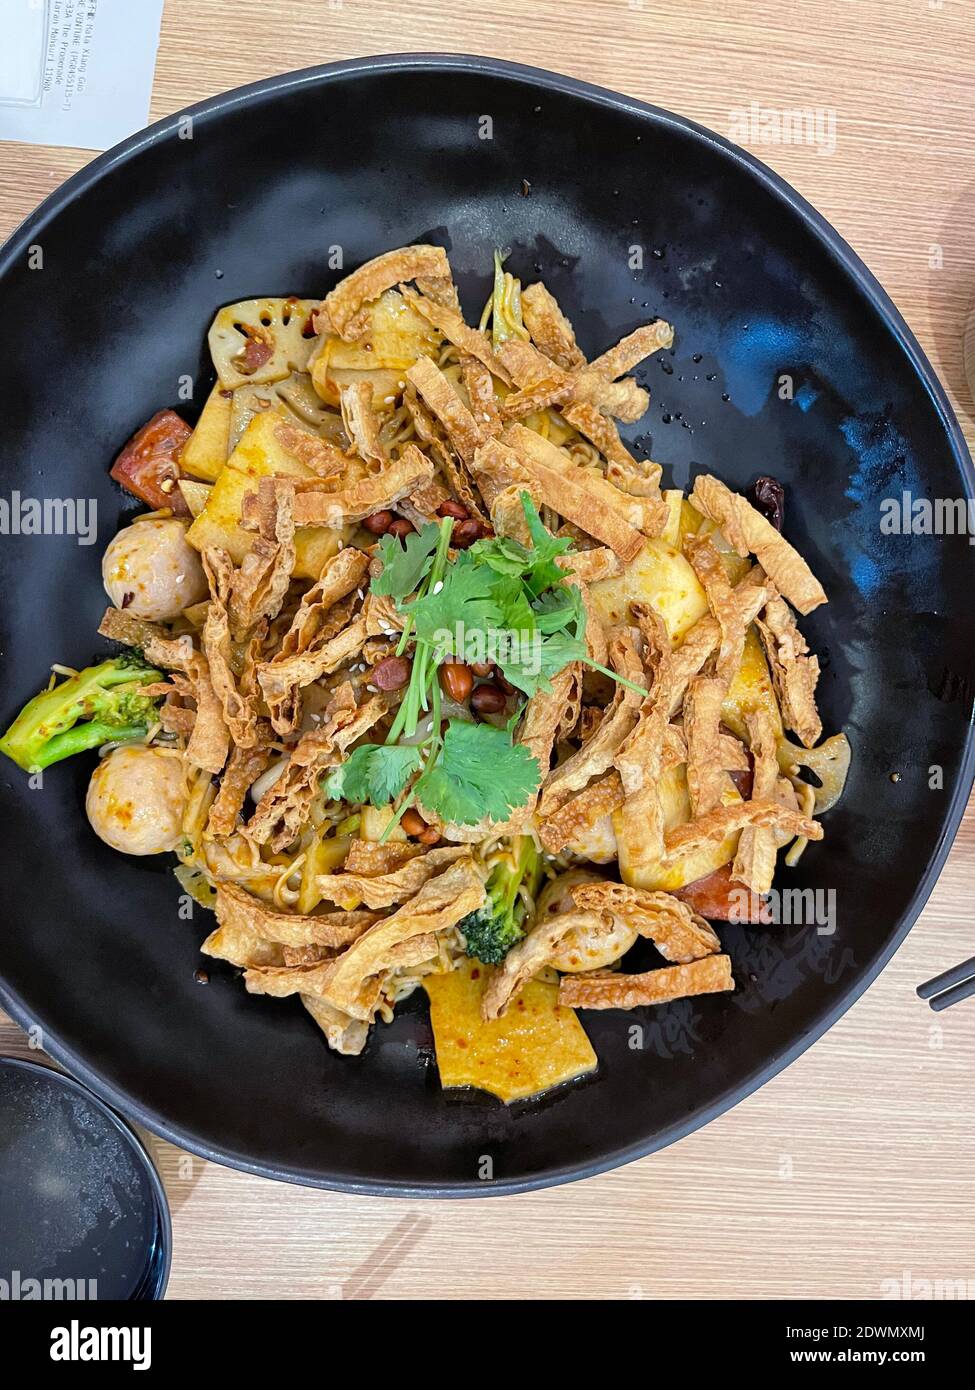 Mala Xiang Guo (Hot Pot) - china popular dish, stir fried assorted mixed vegetables, seafood, mushroom and meat in hot chilli seasoning. Stock Photo